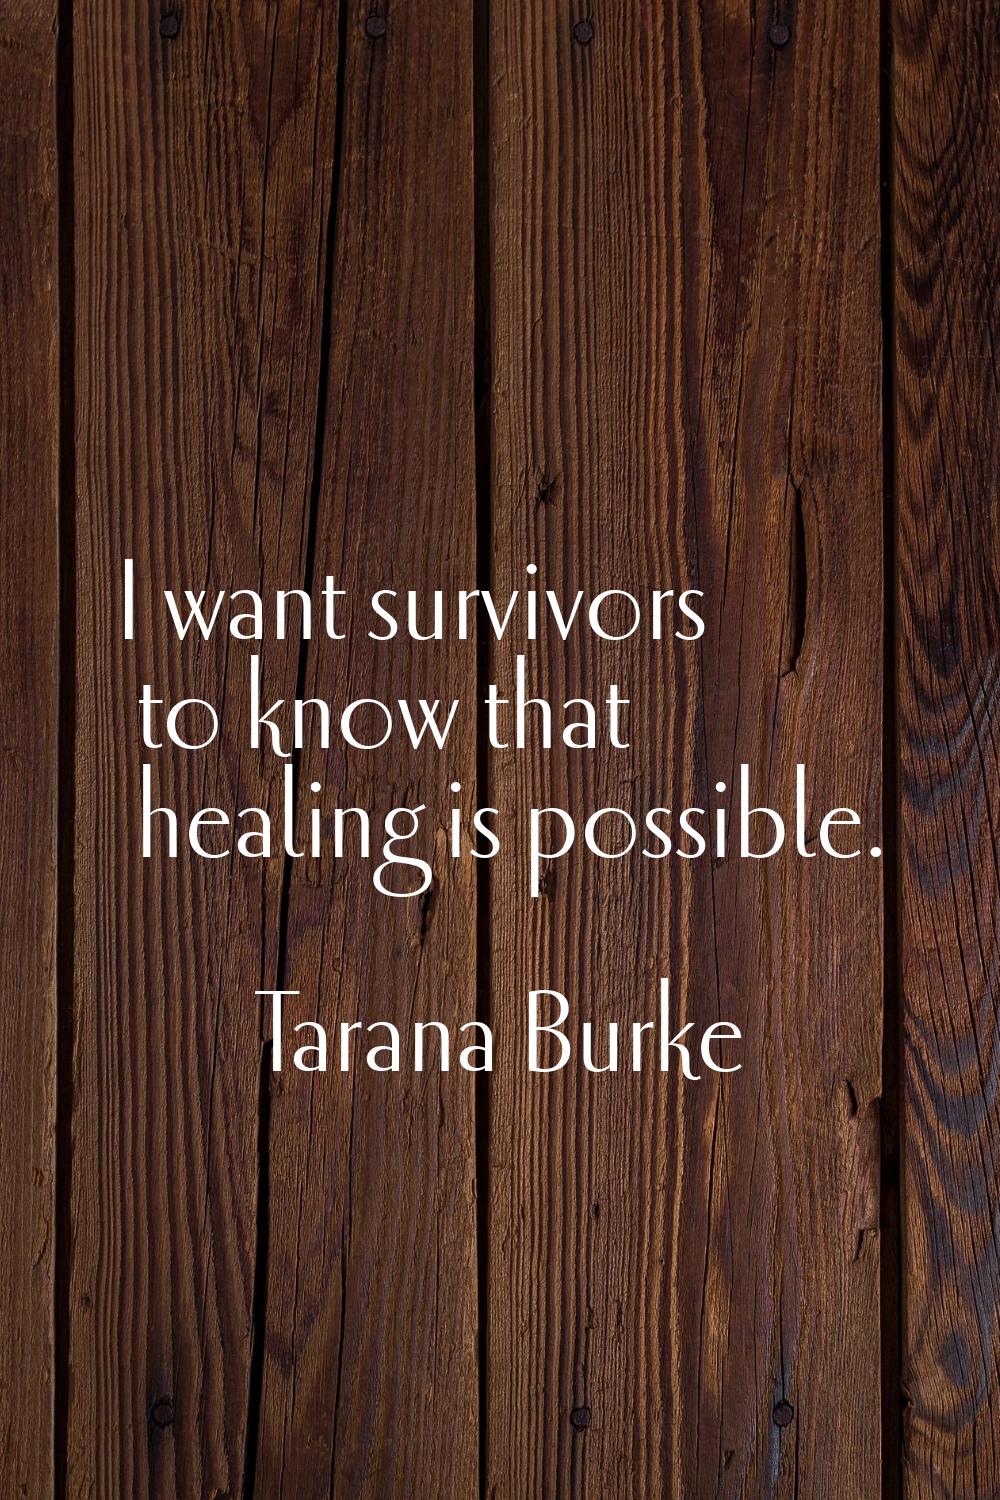 I want survivors to know that healing is possible.